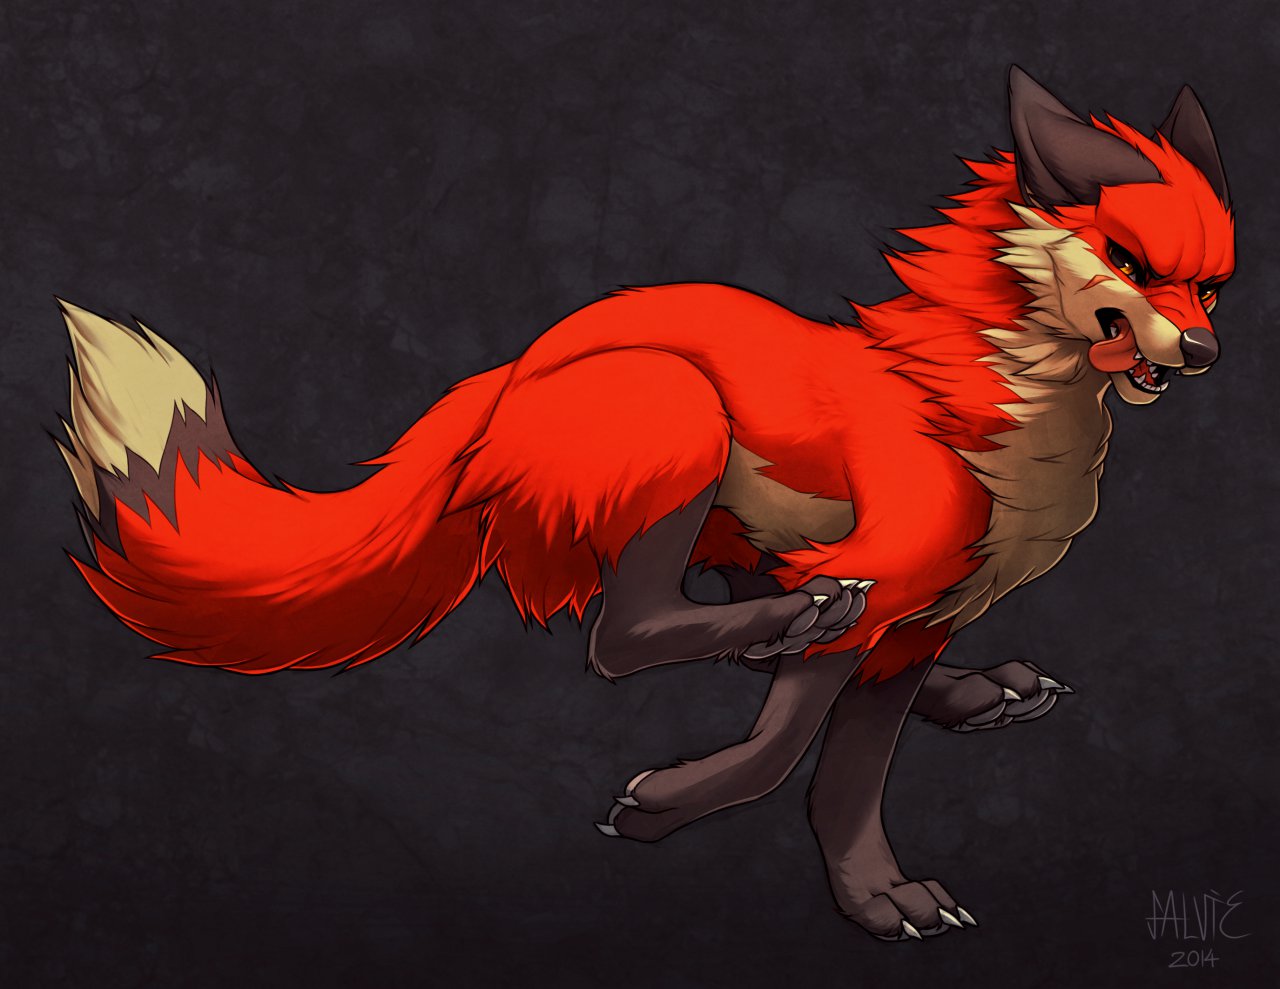 Scar artwork #2 The Quick Red by The_Evil_Fox -- Fur Affinity [dot] net